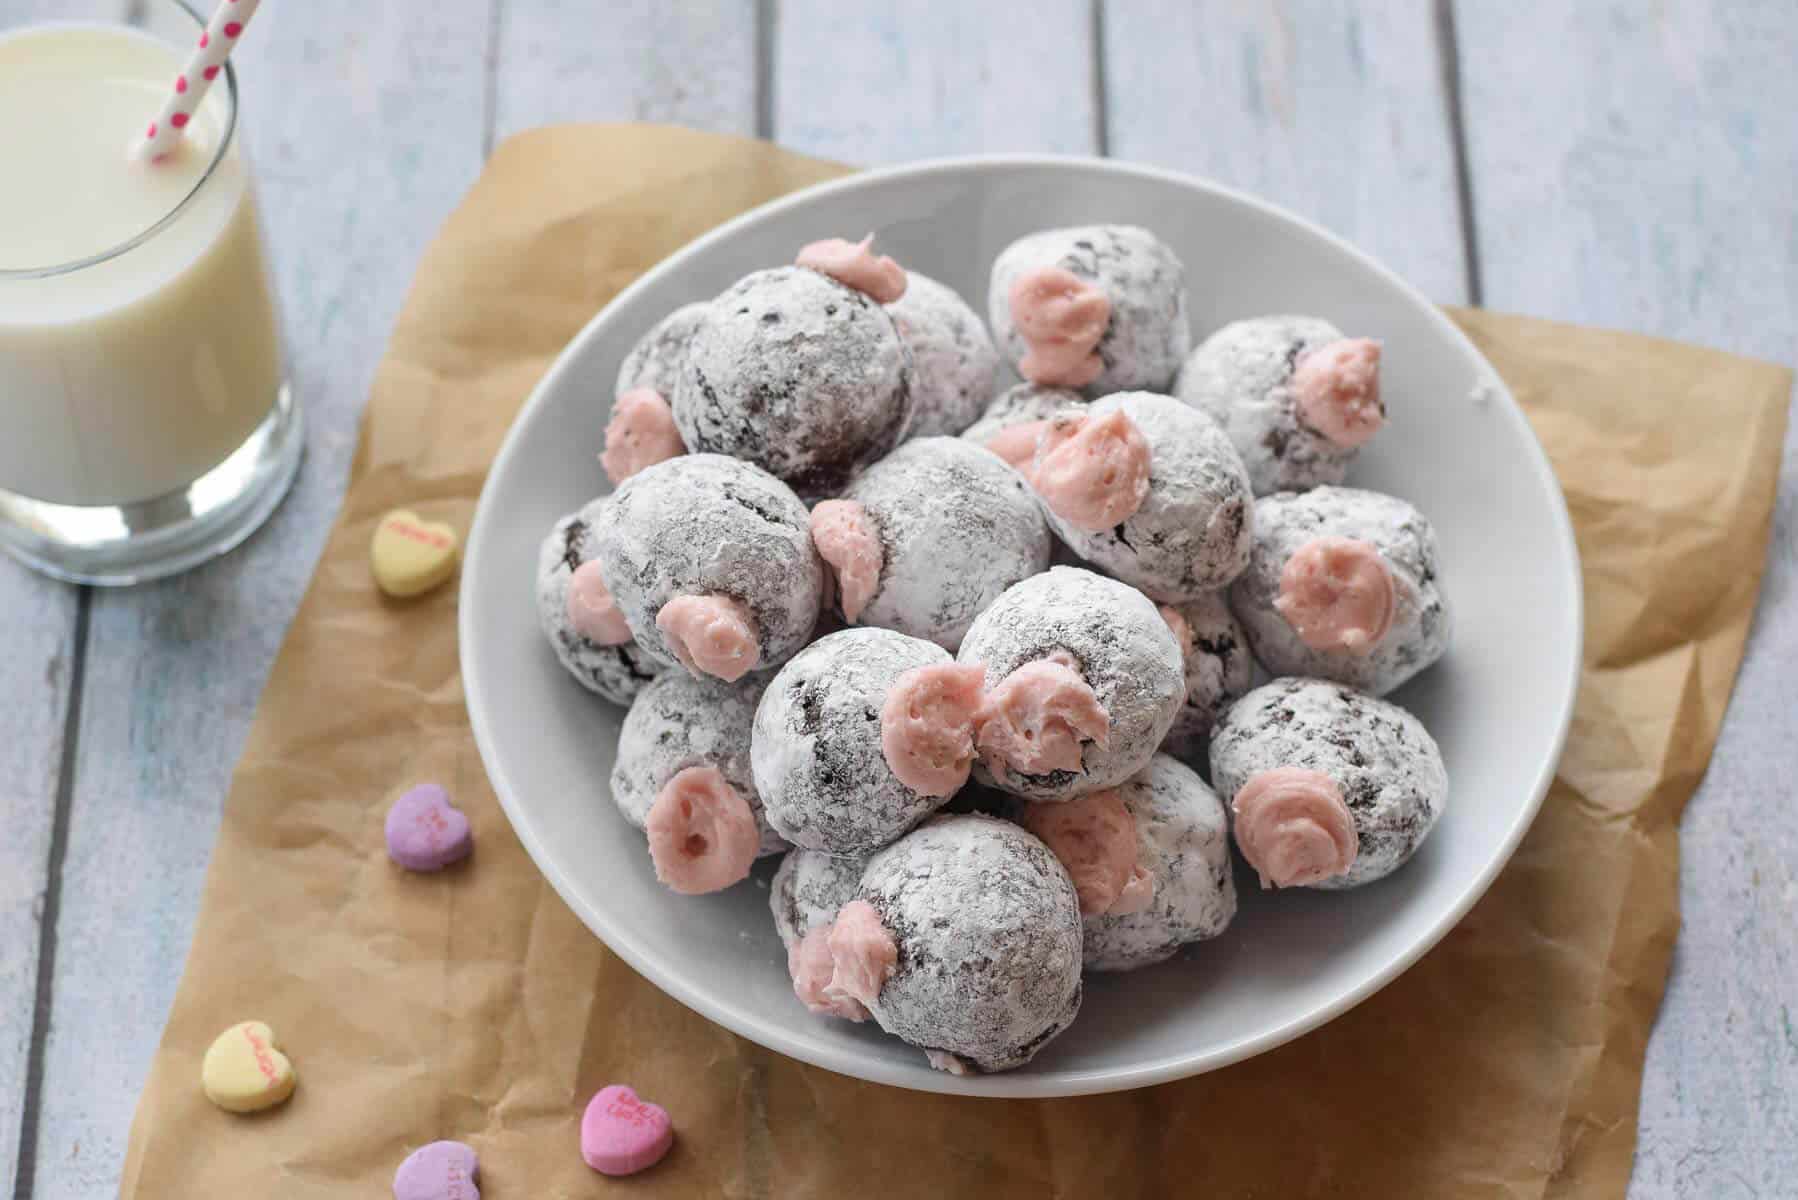 Chocolate Donut Holes with Pomegranate Cream Filling - sweet, fluffy breakfast treats that are gluten free.